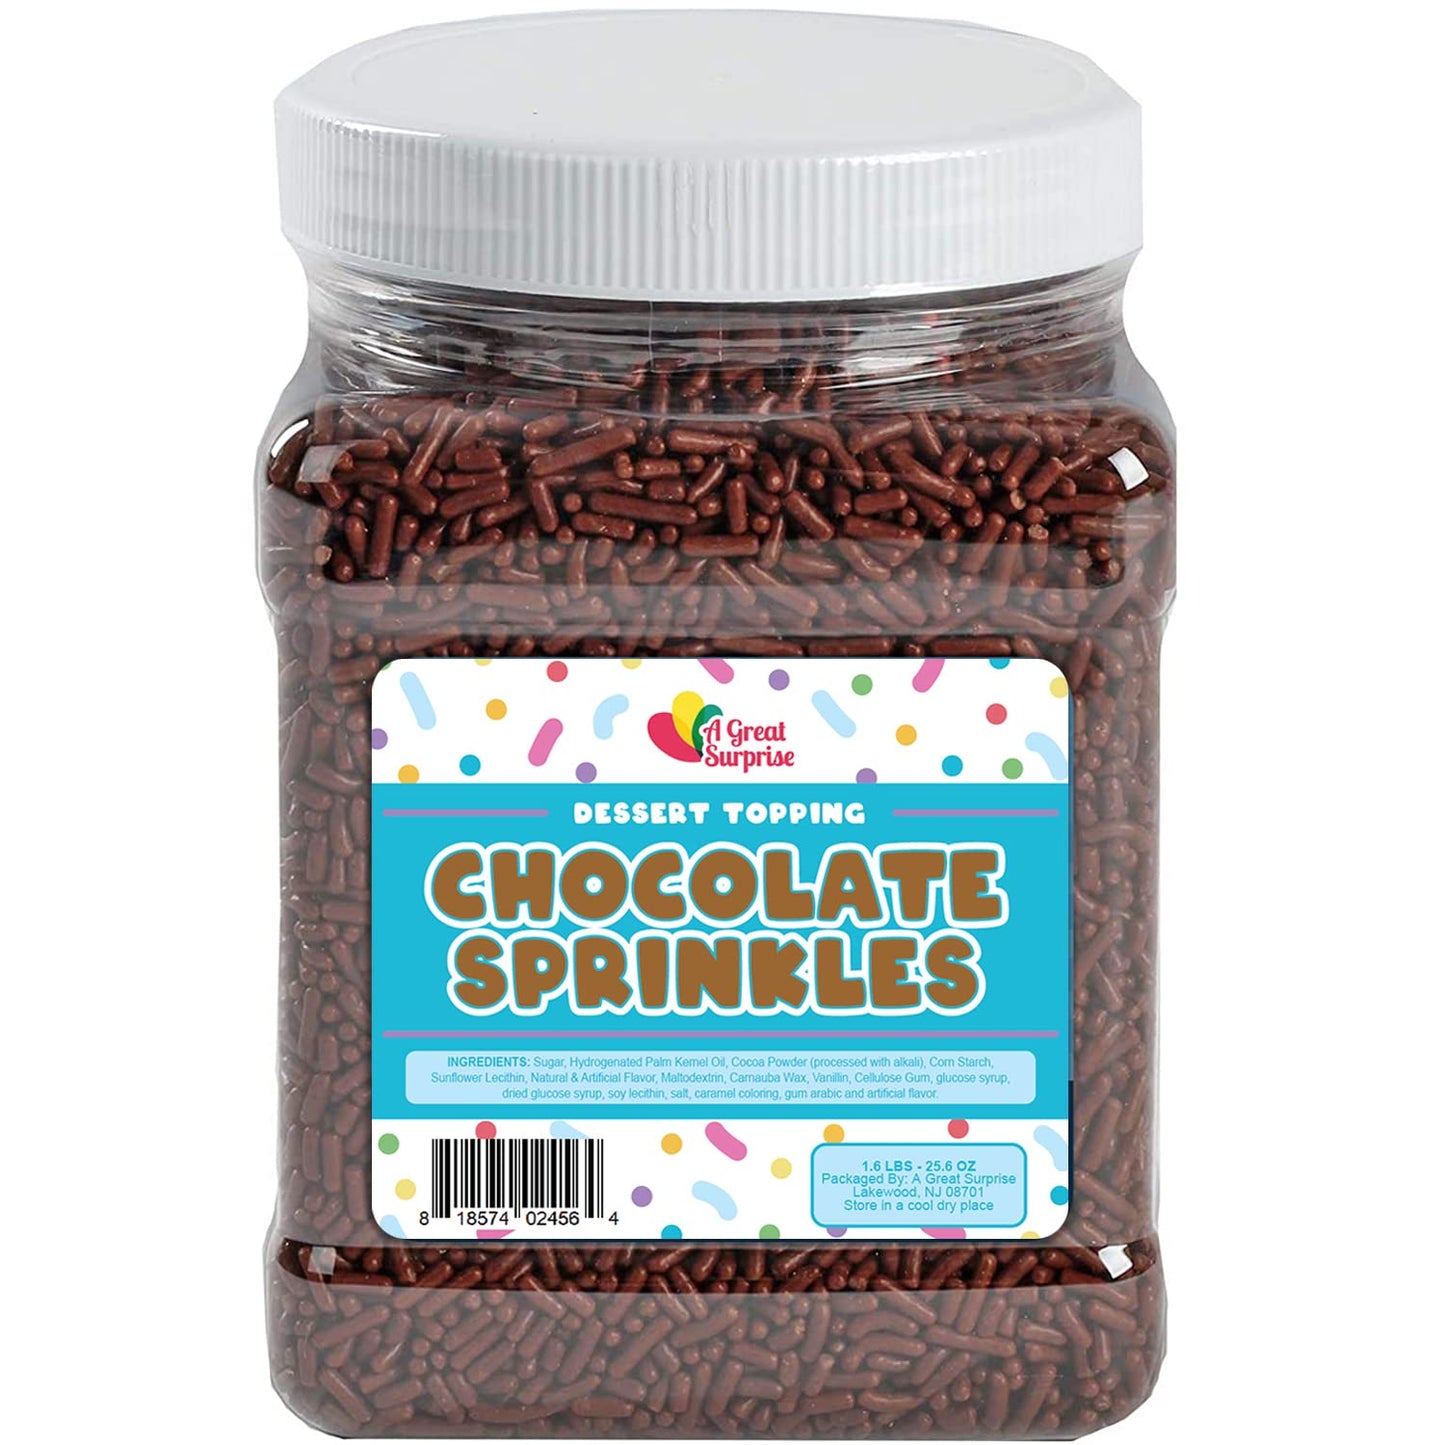 Chocolate Sprinkles Flavored Topping in Resealable Container, Cake Decorating, Cupcake, Baking - 1.6 LB Bulk Candy